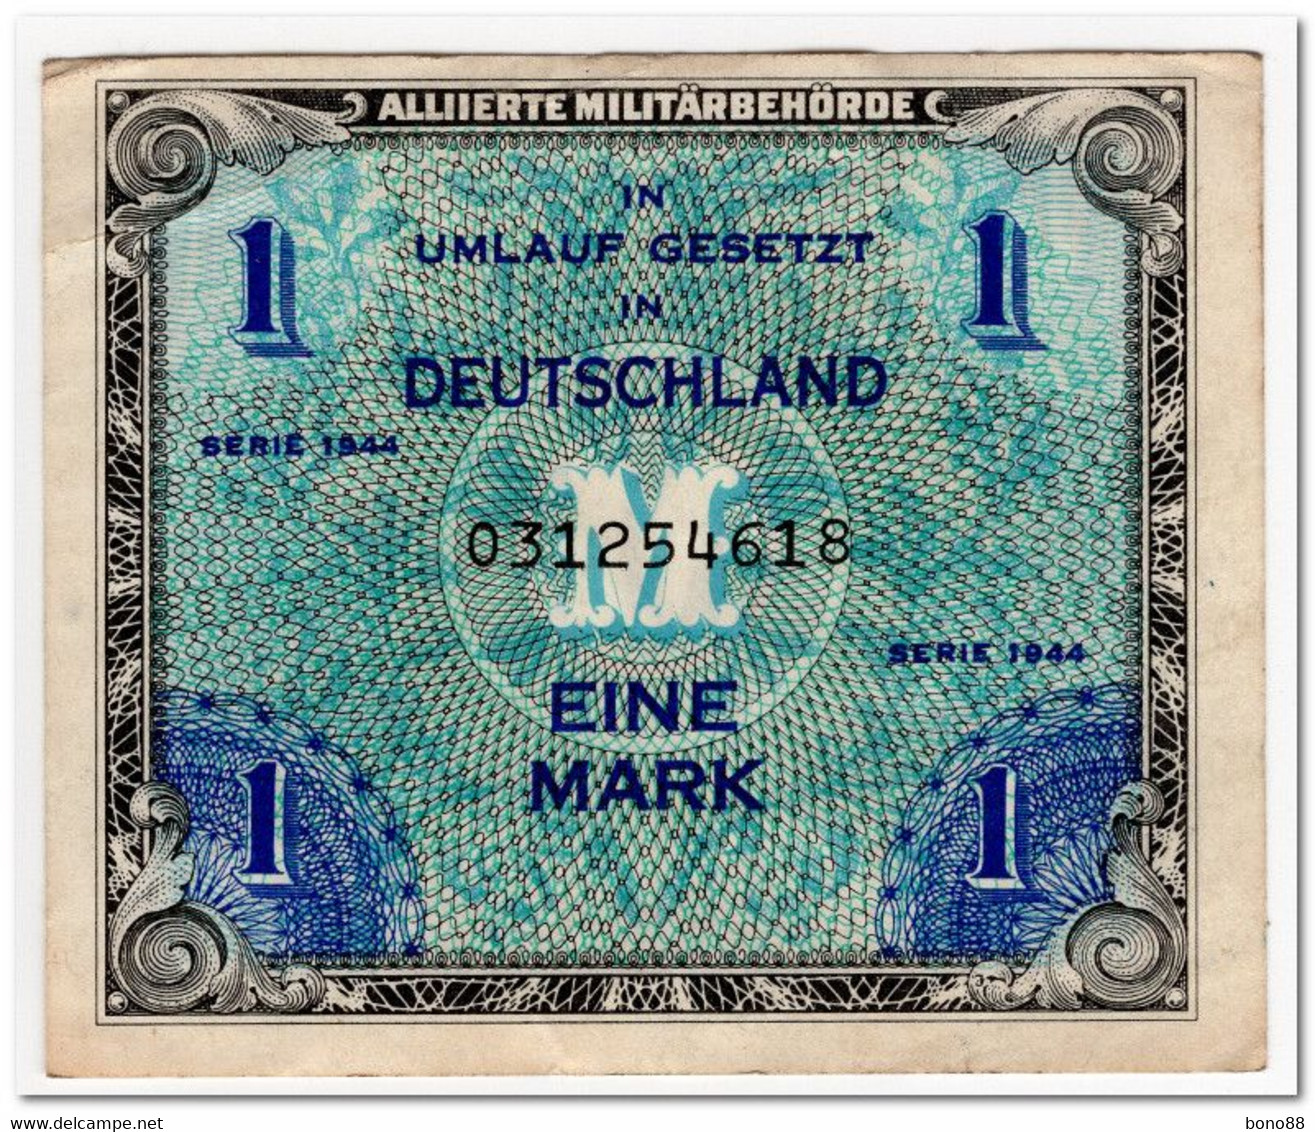 GERMANY,MILITARY PAYMENT,1 MARK,1944,P.192b,XF+ - 1 Mark